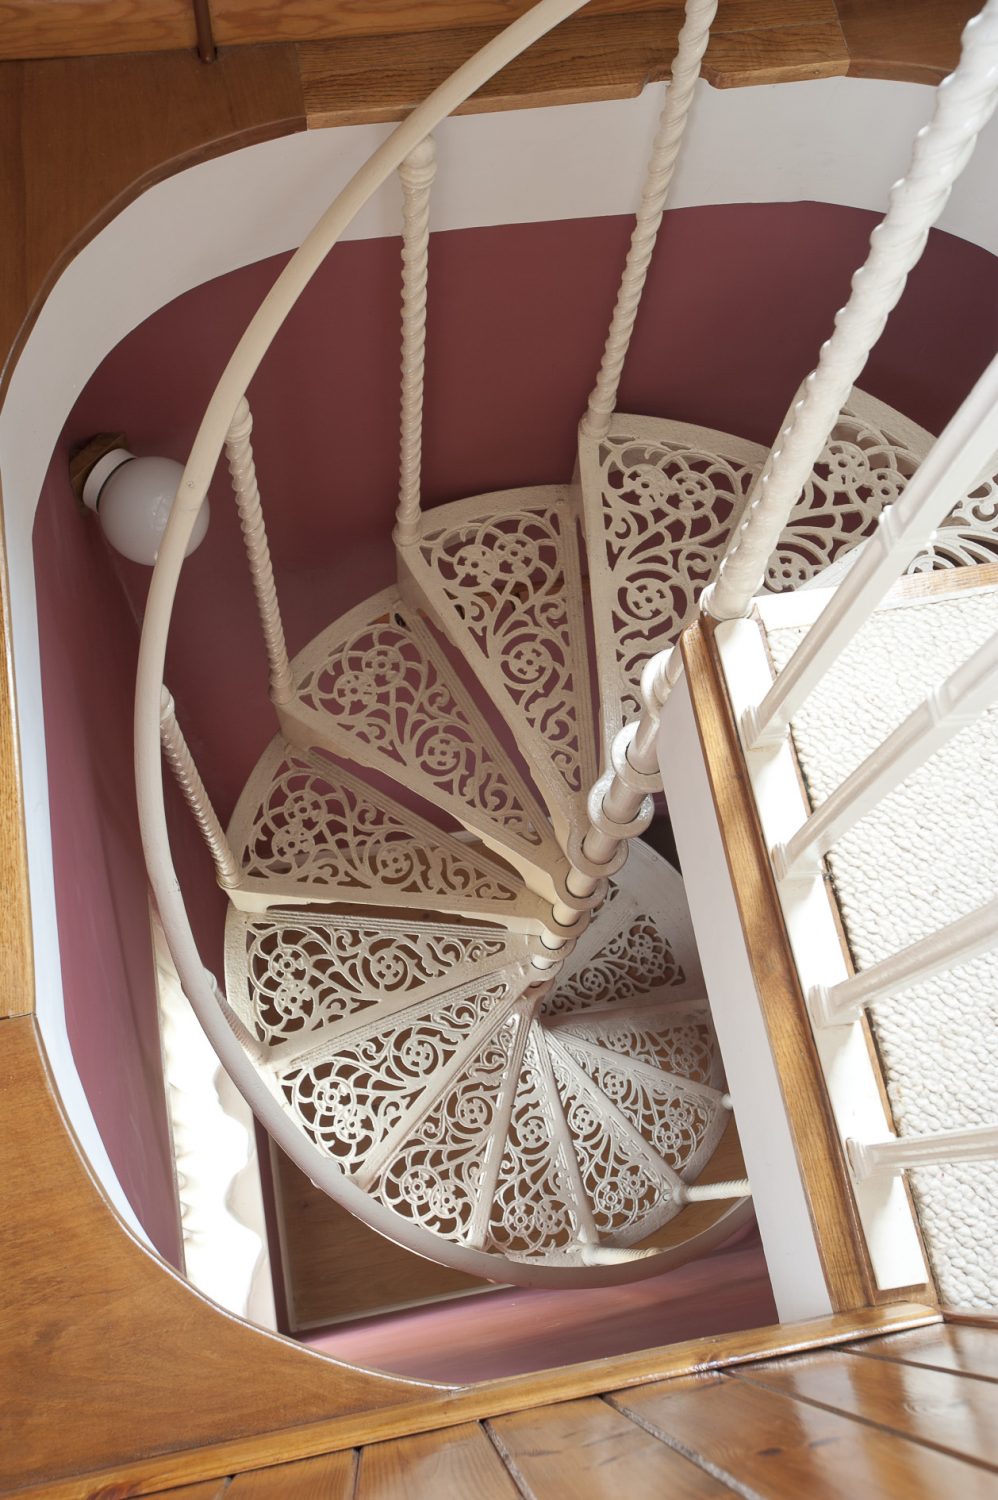 The intricate wrought-iron spiral staircase